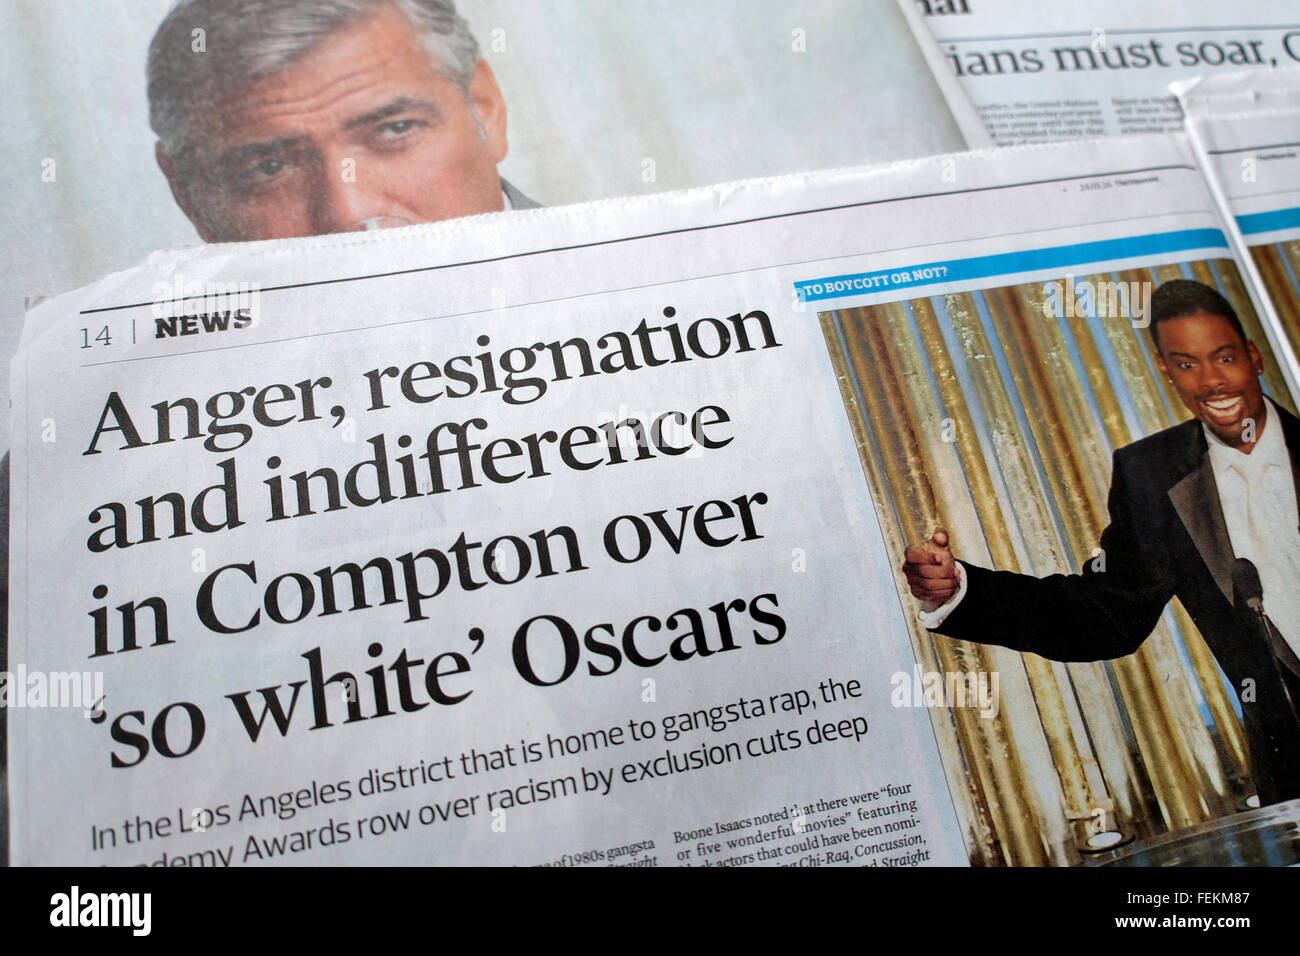 'Anger resignation and indifference in Comption over 'so white' Oscars'  Guardian newspaper article January 2016 Stock Photo